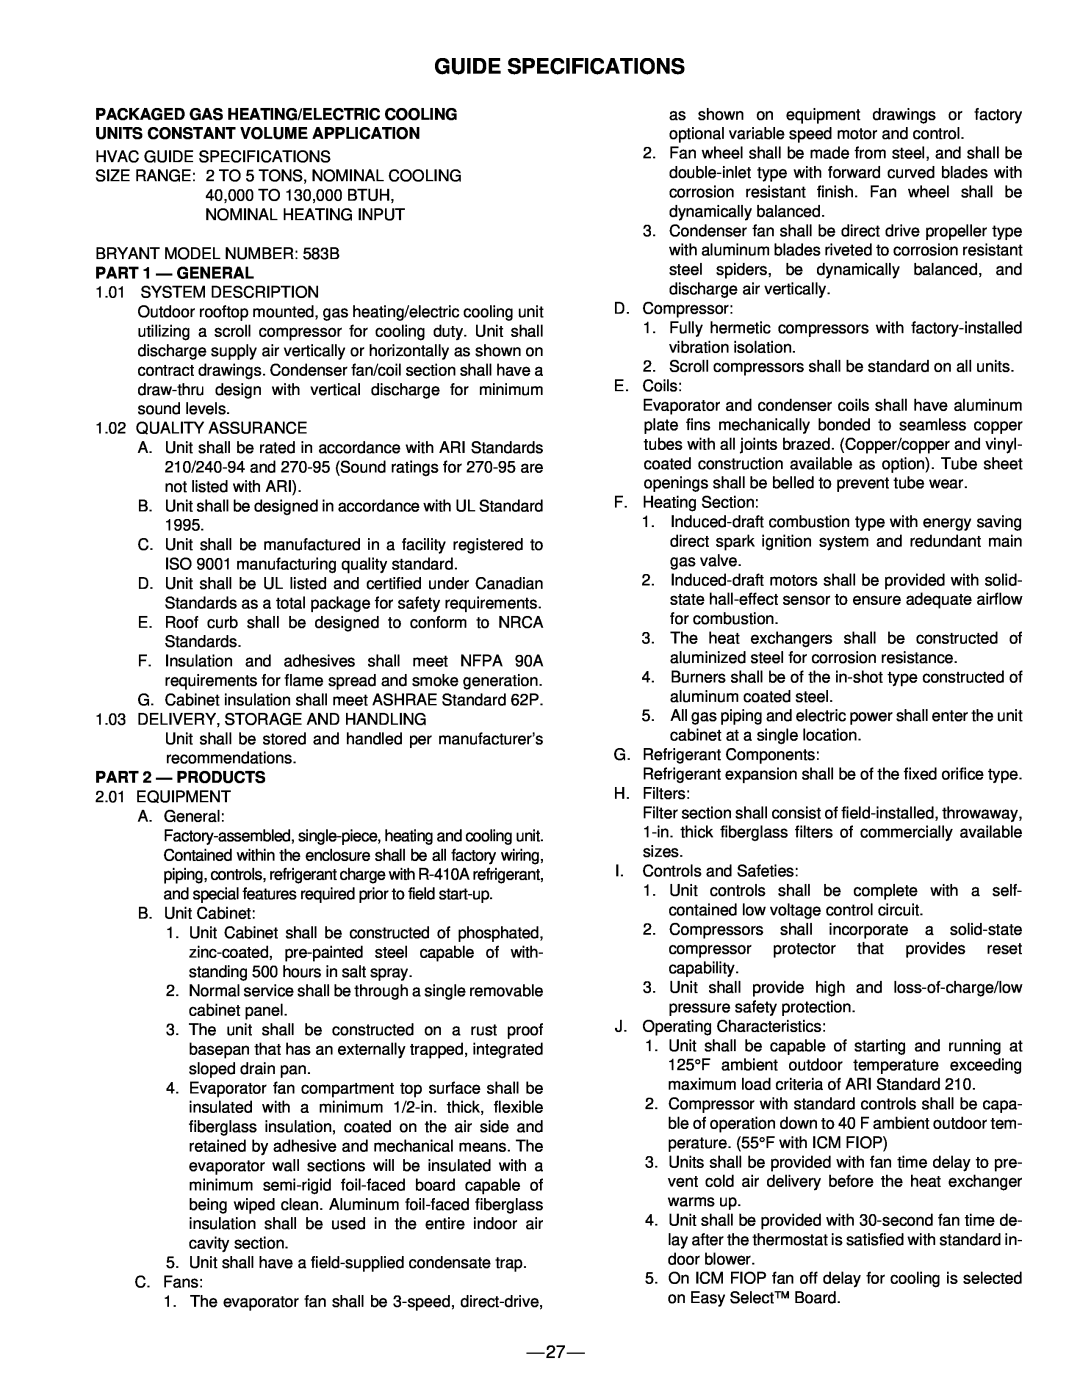 Bryant 583B manual Guide Specifications, PART 1 - GENERAL, PART 2 - PRODUCTS 